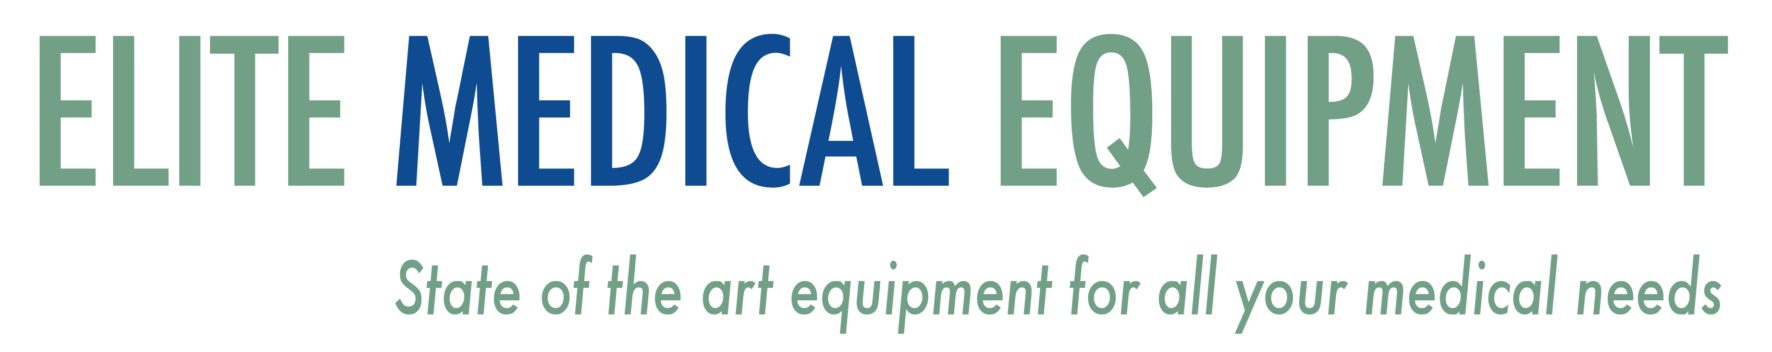 Elite Medical Equipment LLC Complete Solutions, For surgical instrument storage and infection control products.